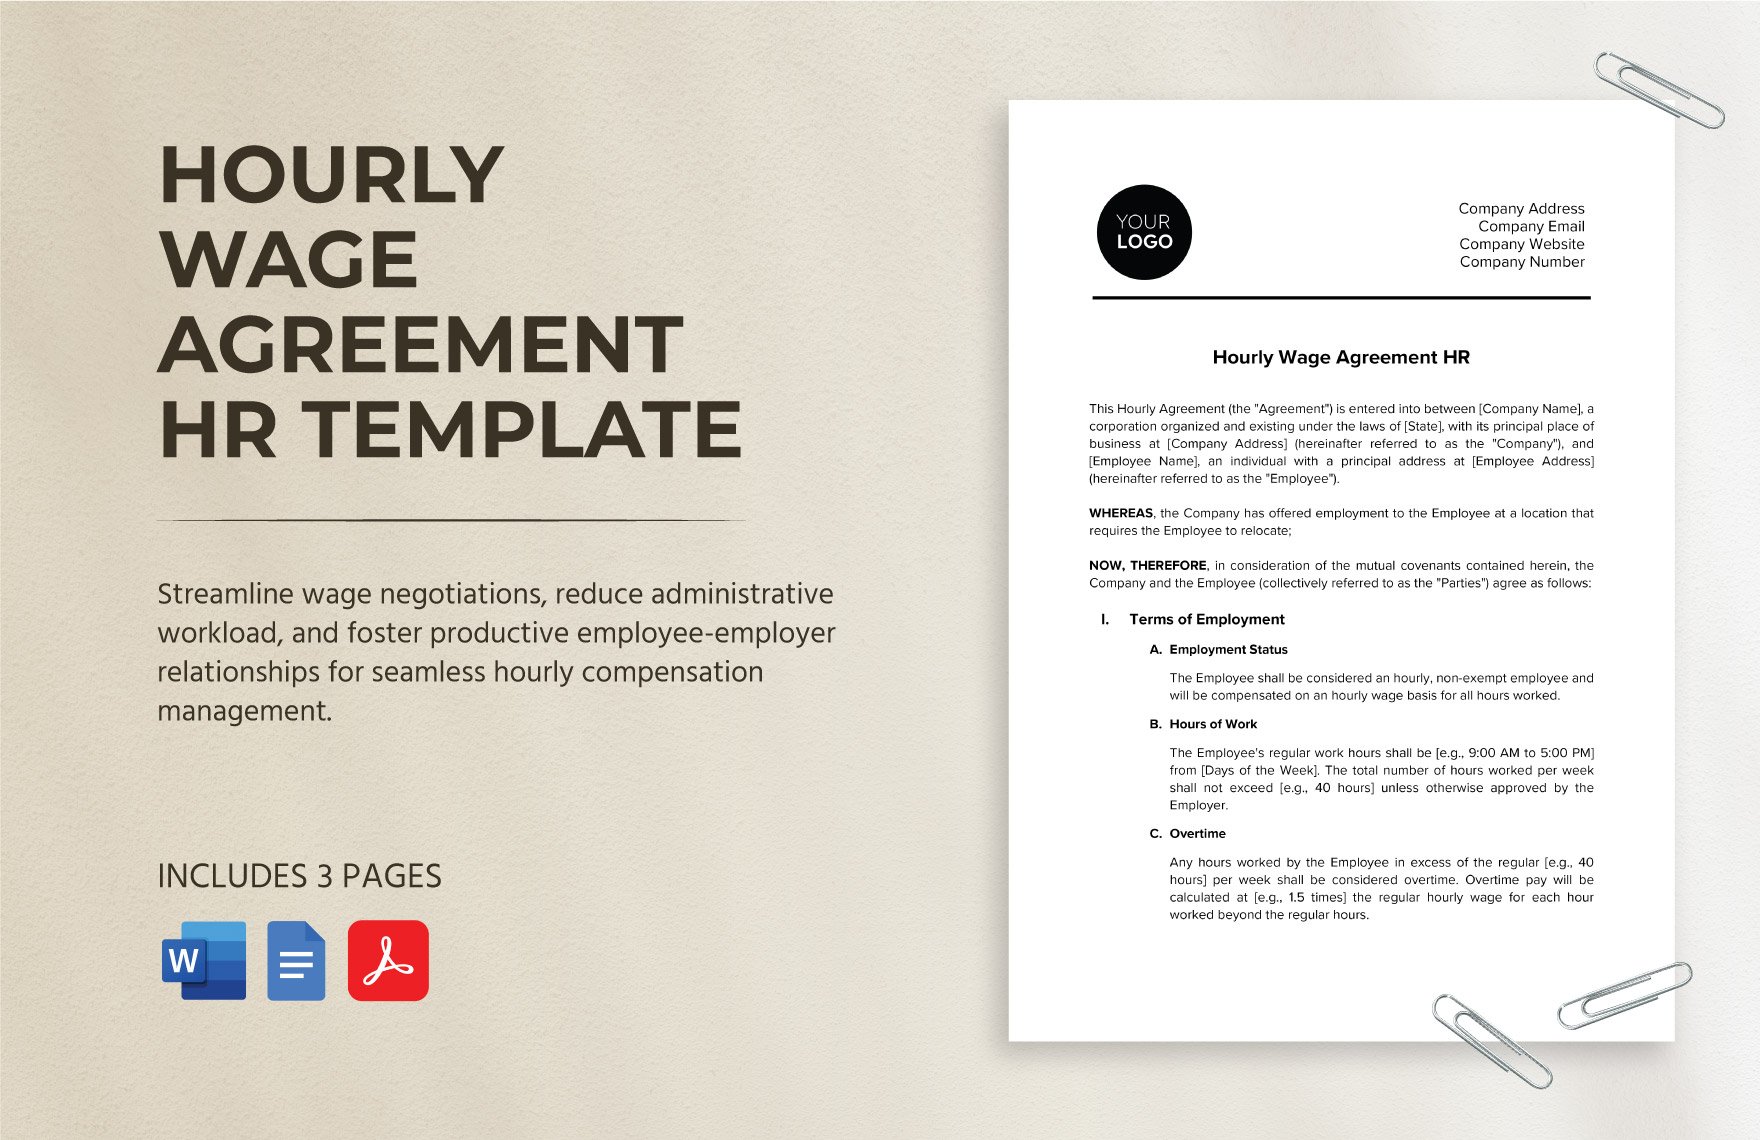 Hourly Wage Agreement HR Template